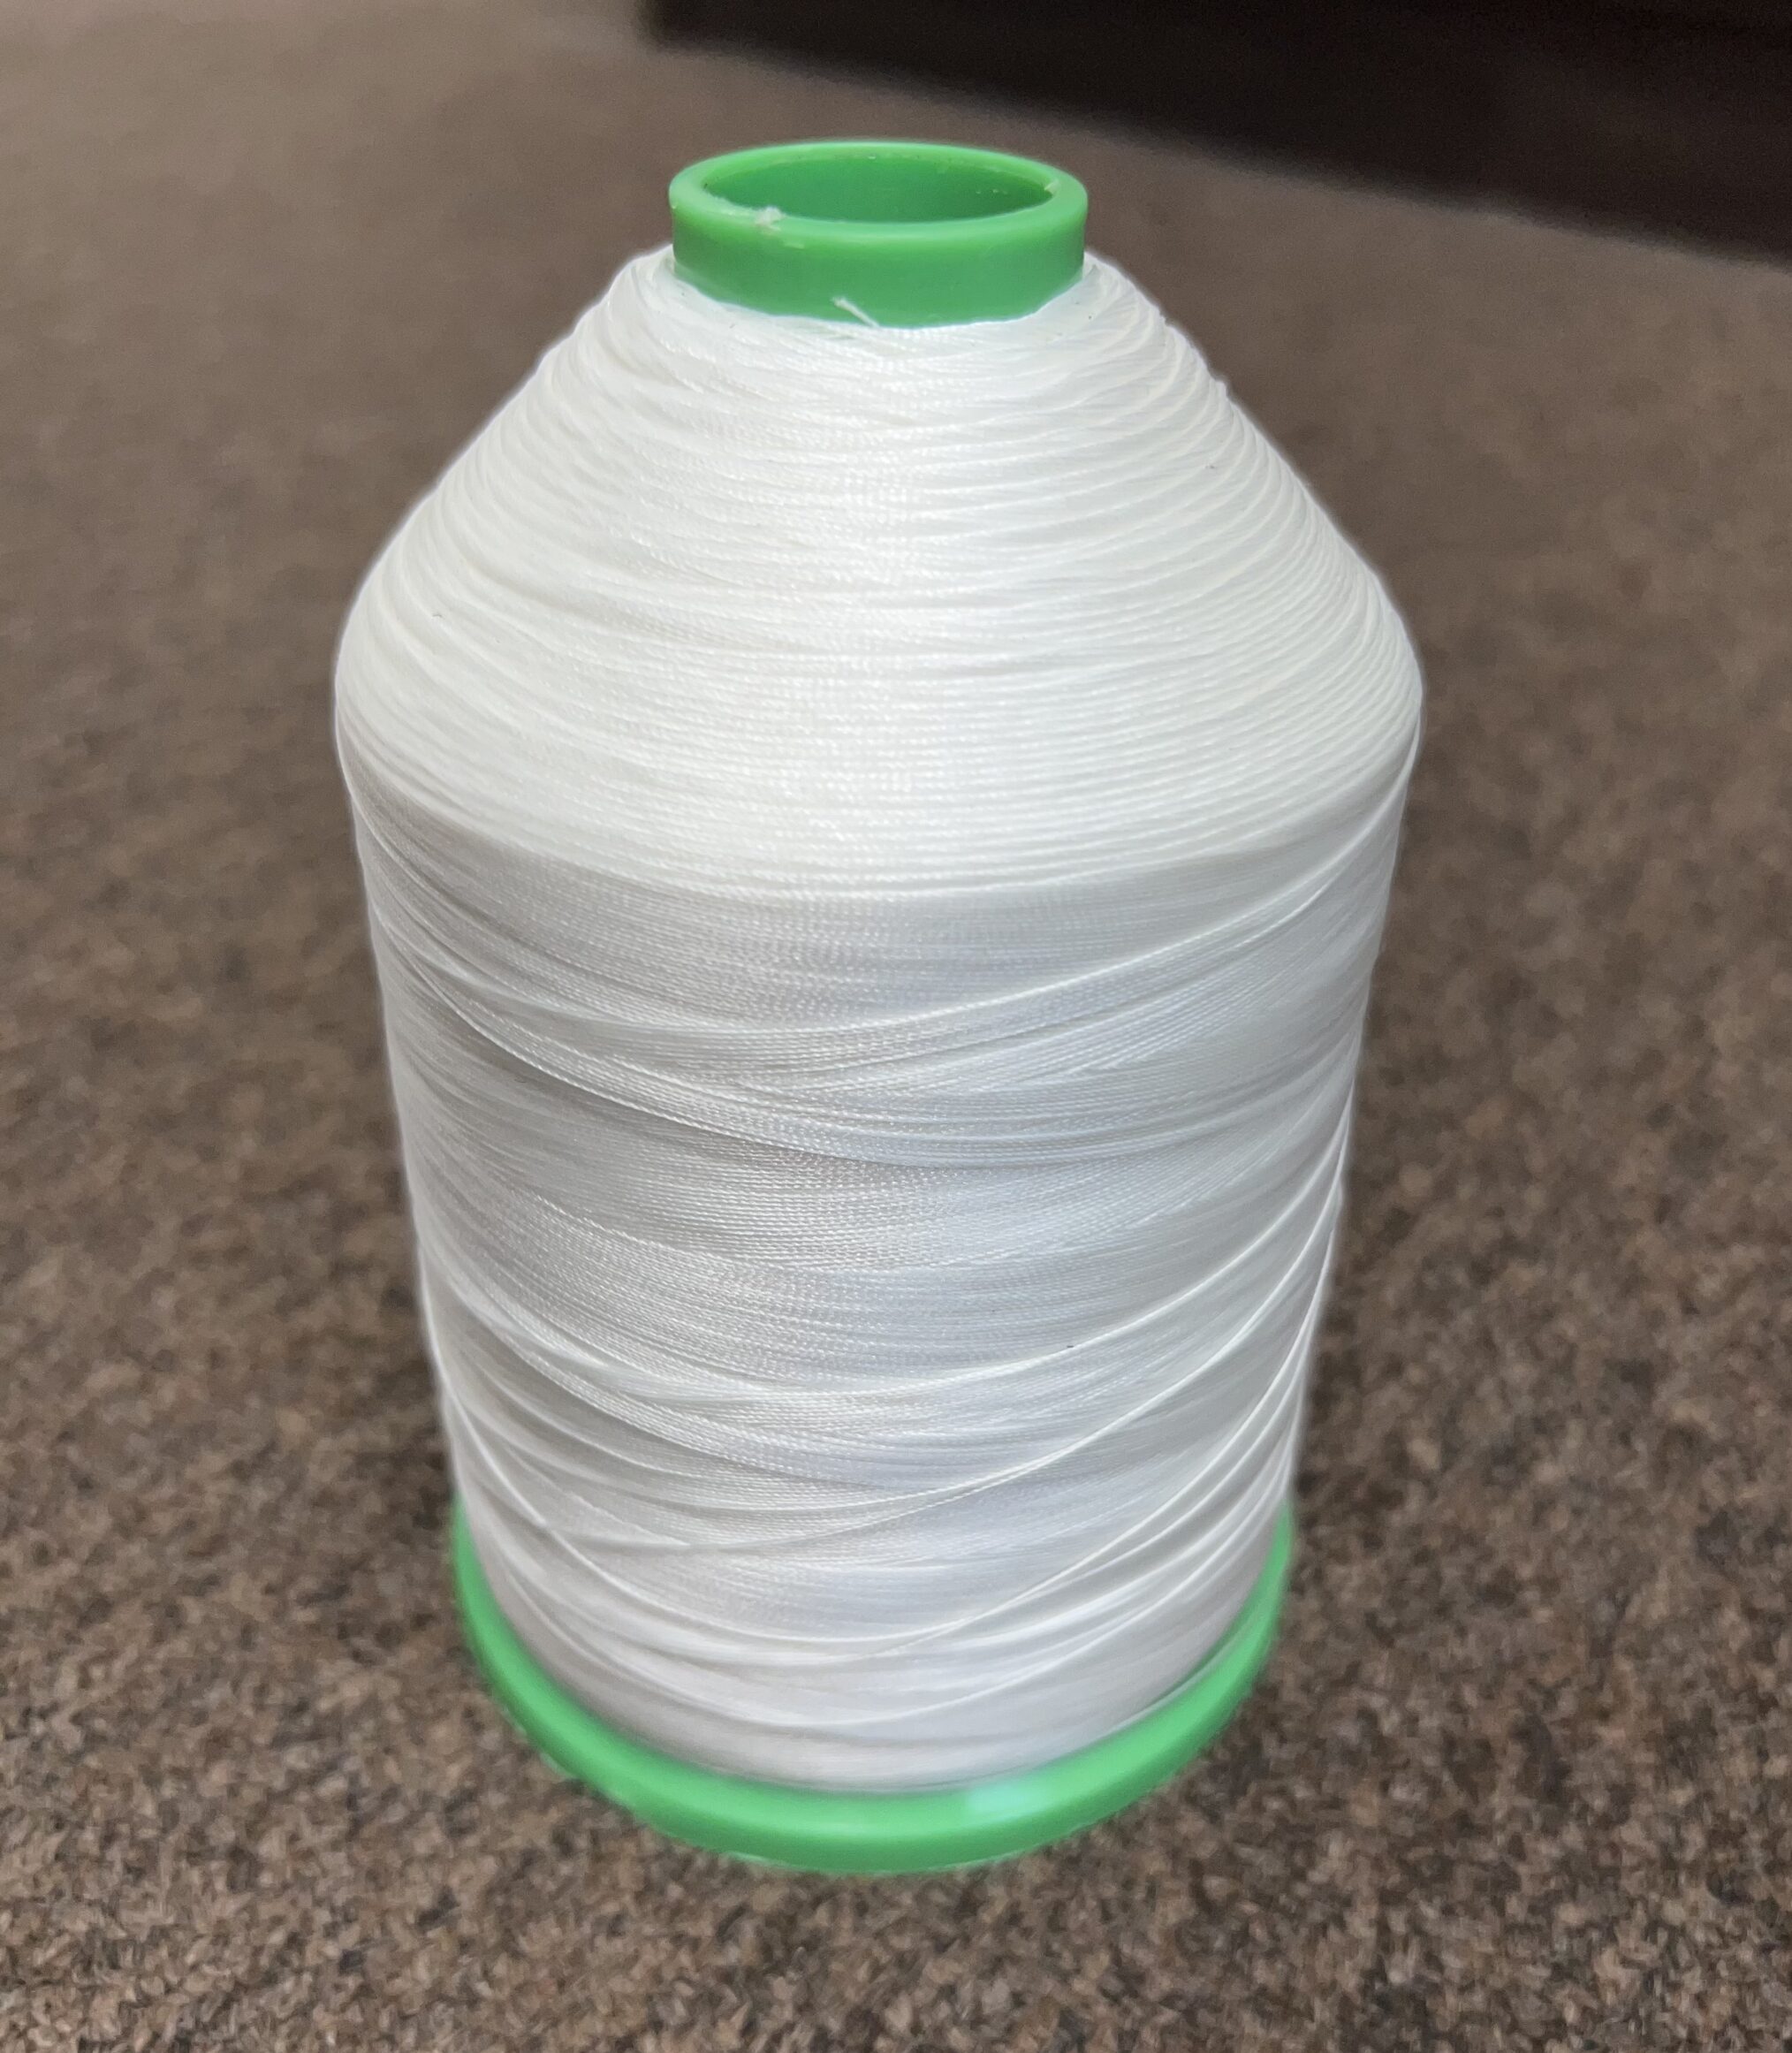 Instabind™ 100% Cotton Rope Edge Binding Style - Bond Products Inc